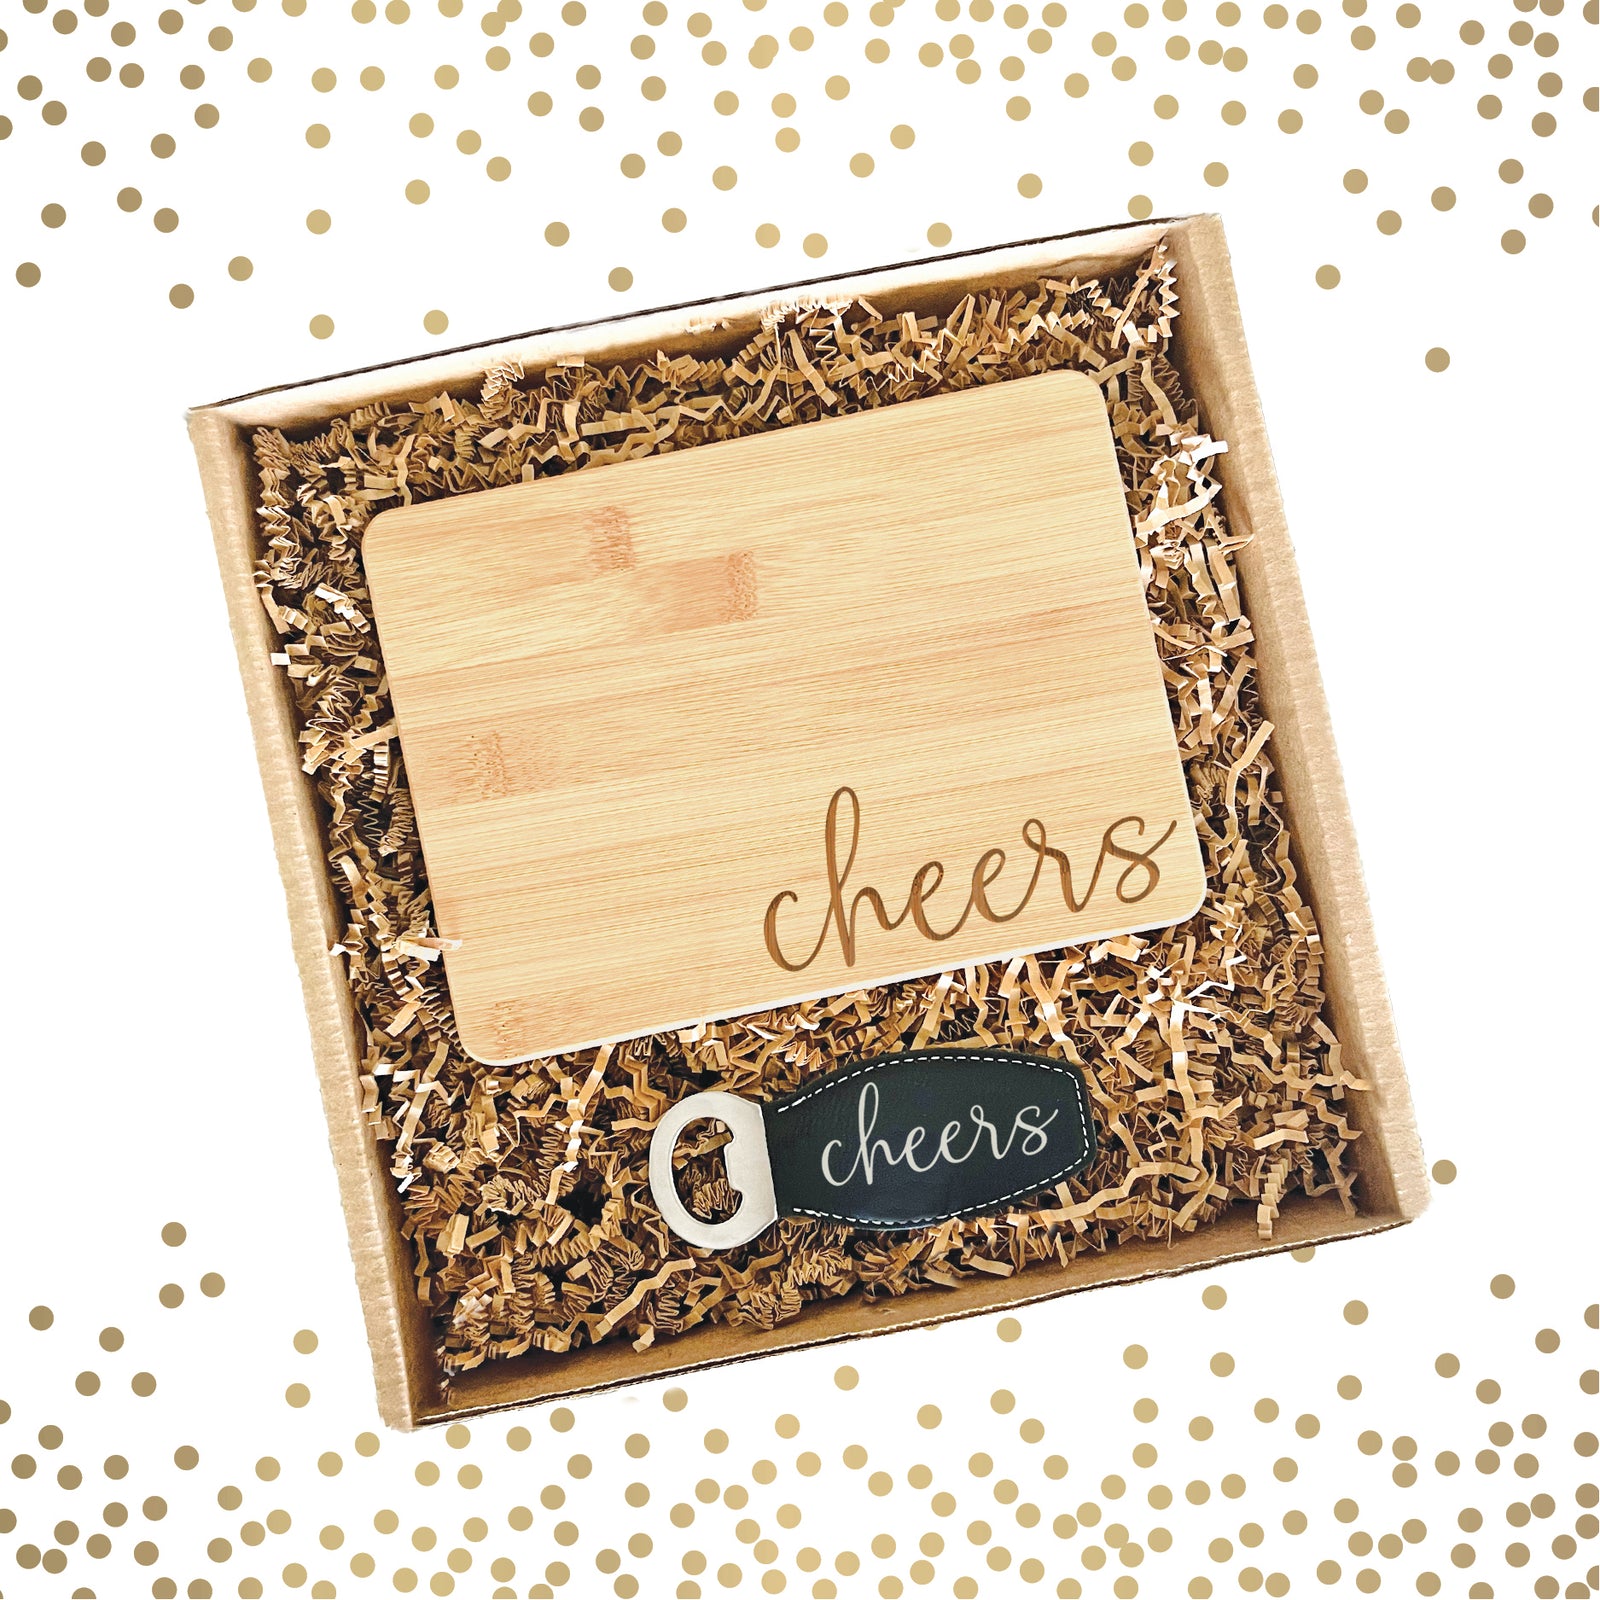 Small "Cheers" Bar Set - Client Gift Set